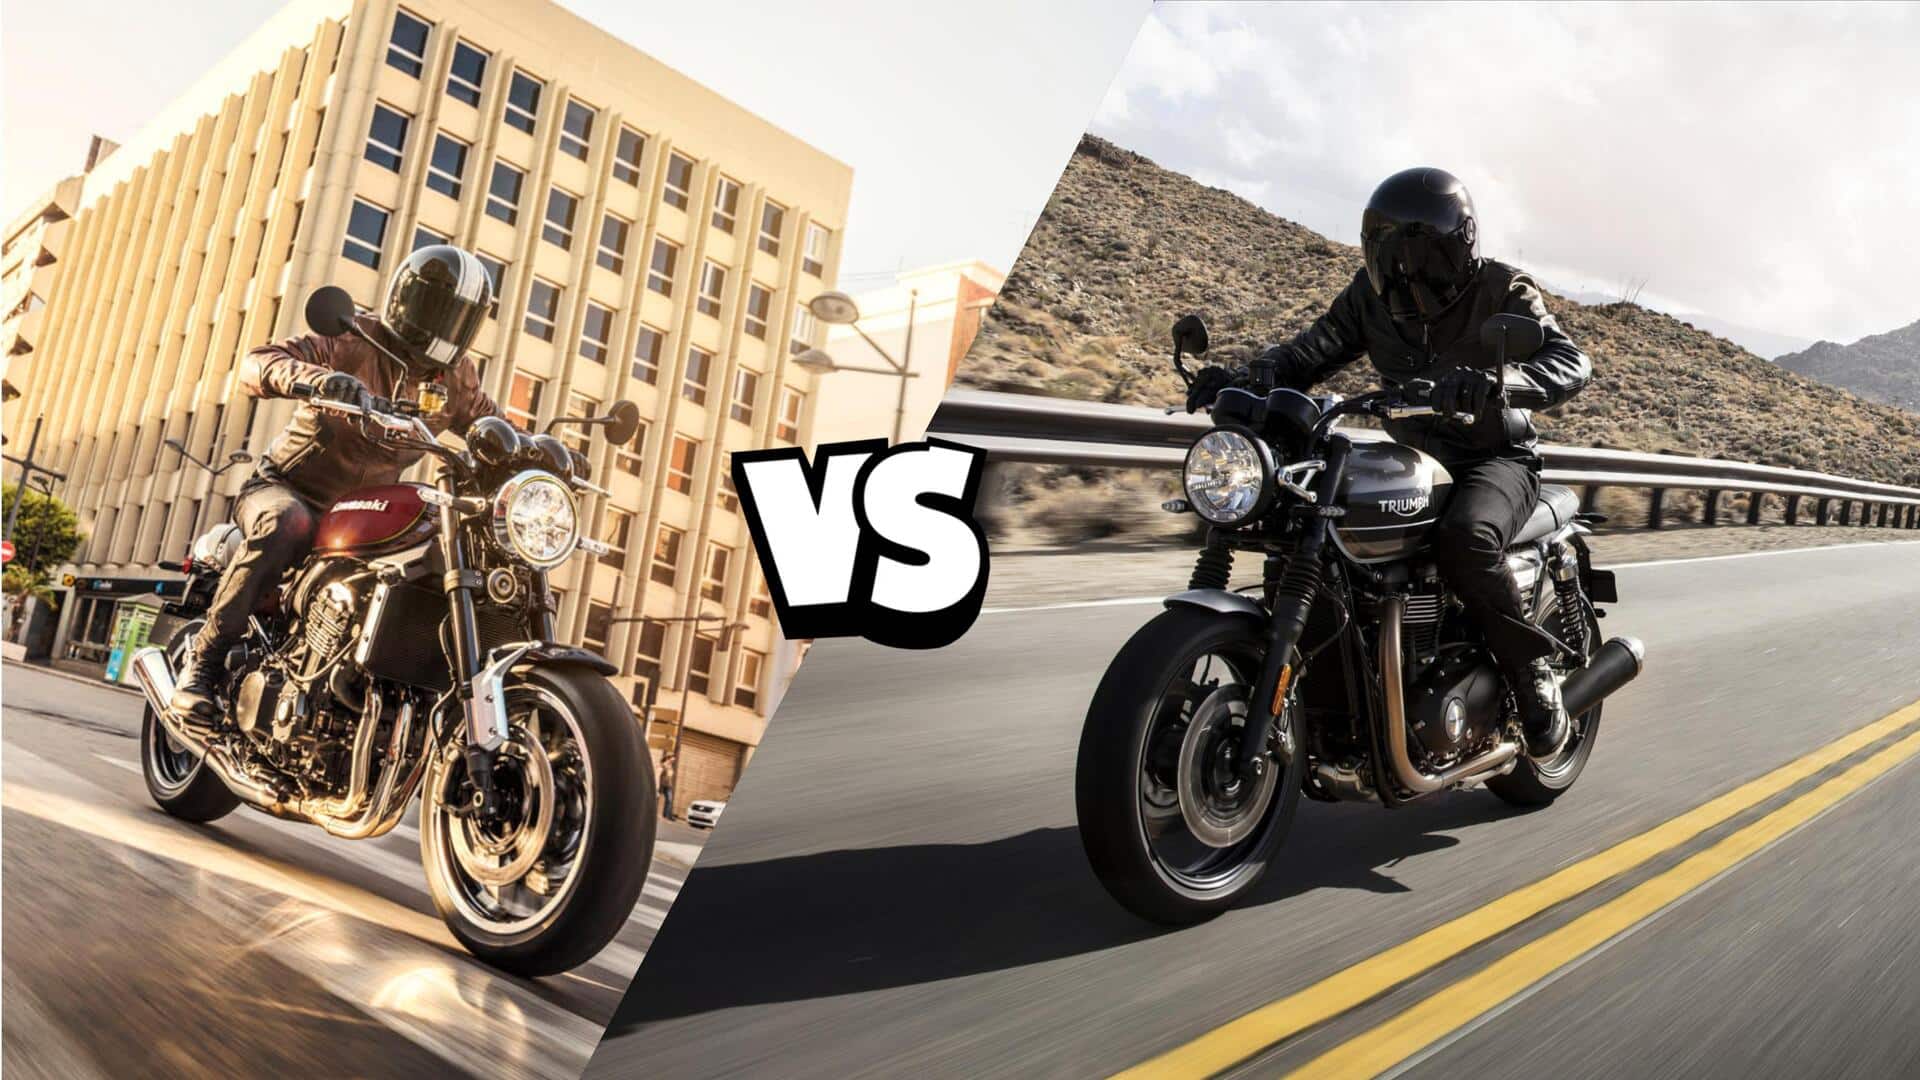 Kawasaki Z900RS v/s Triumph Speed 1200: Which is better